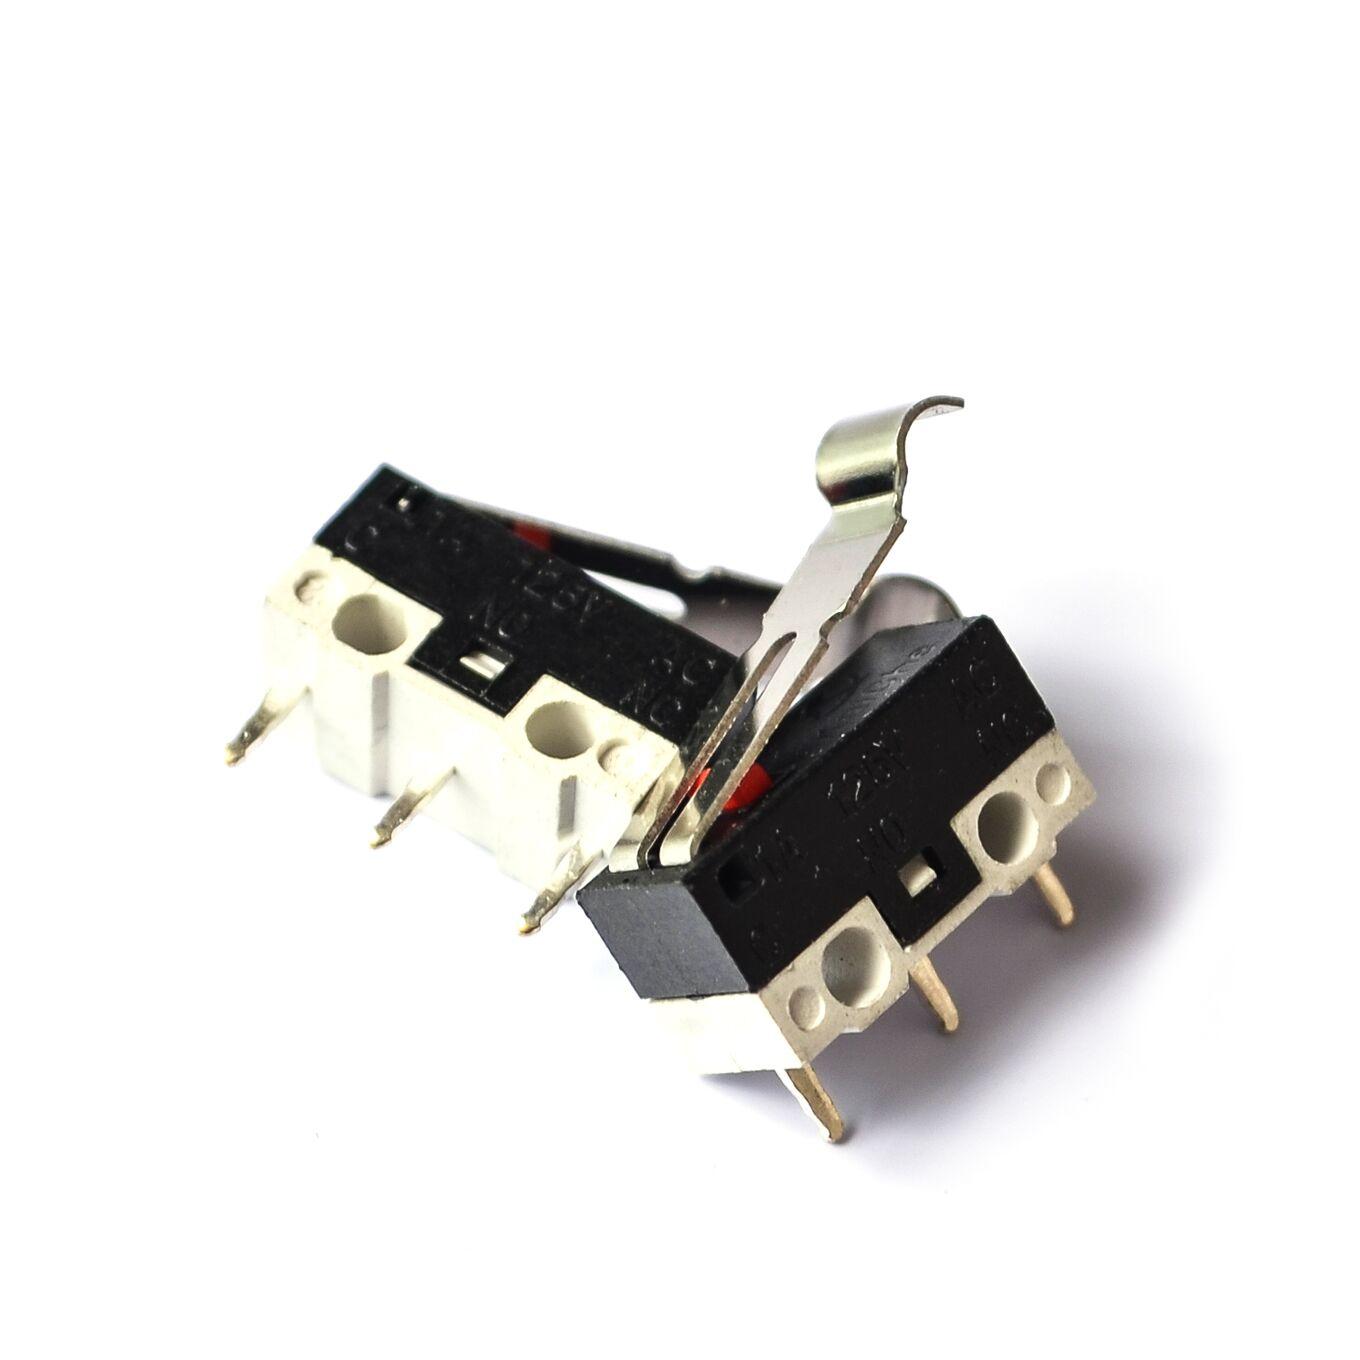 50pcs Limit Microswitch With Three Straight Legs Mouse Side Key Momentary Micro Limit Switch 1A/125VAC For MK7/ MK8